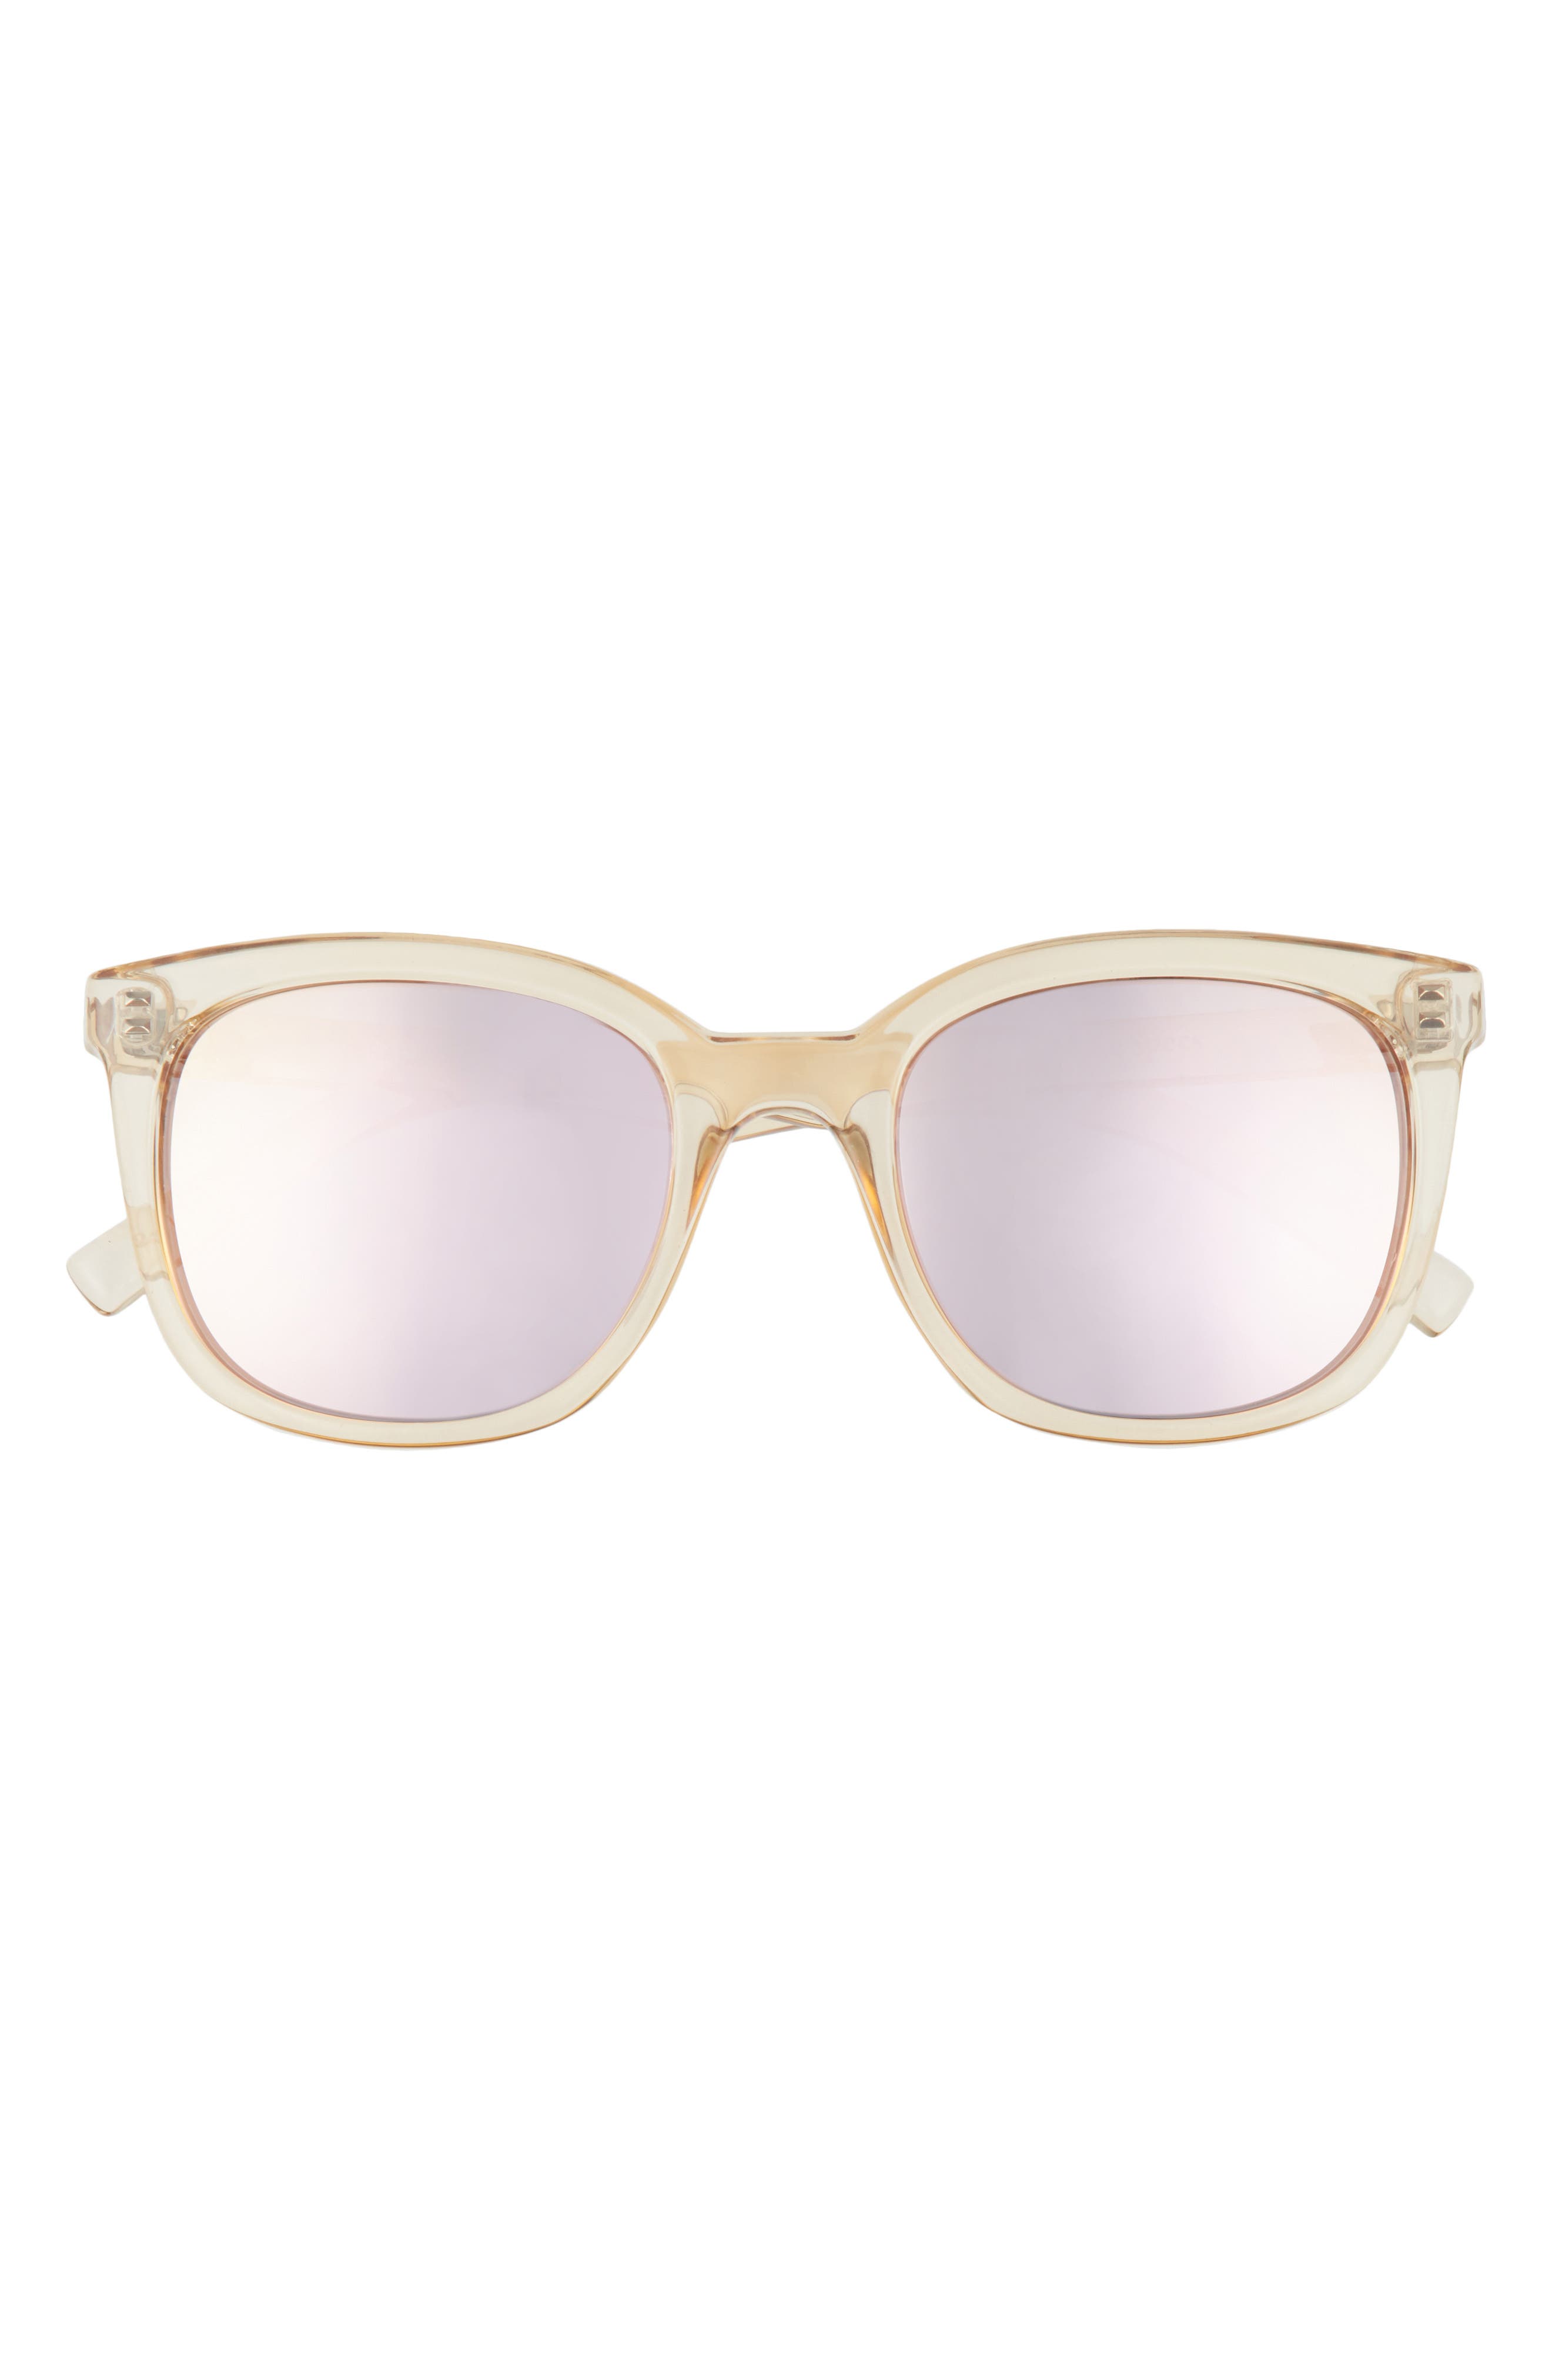 Le Specs Veracious 52mm Square Sunglasses in Sand/Rose Mirror at Nordstrom